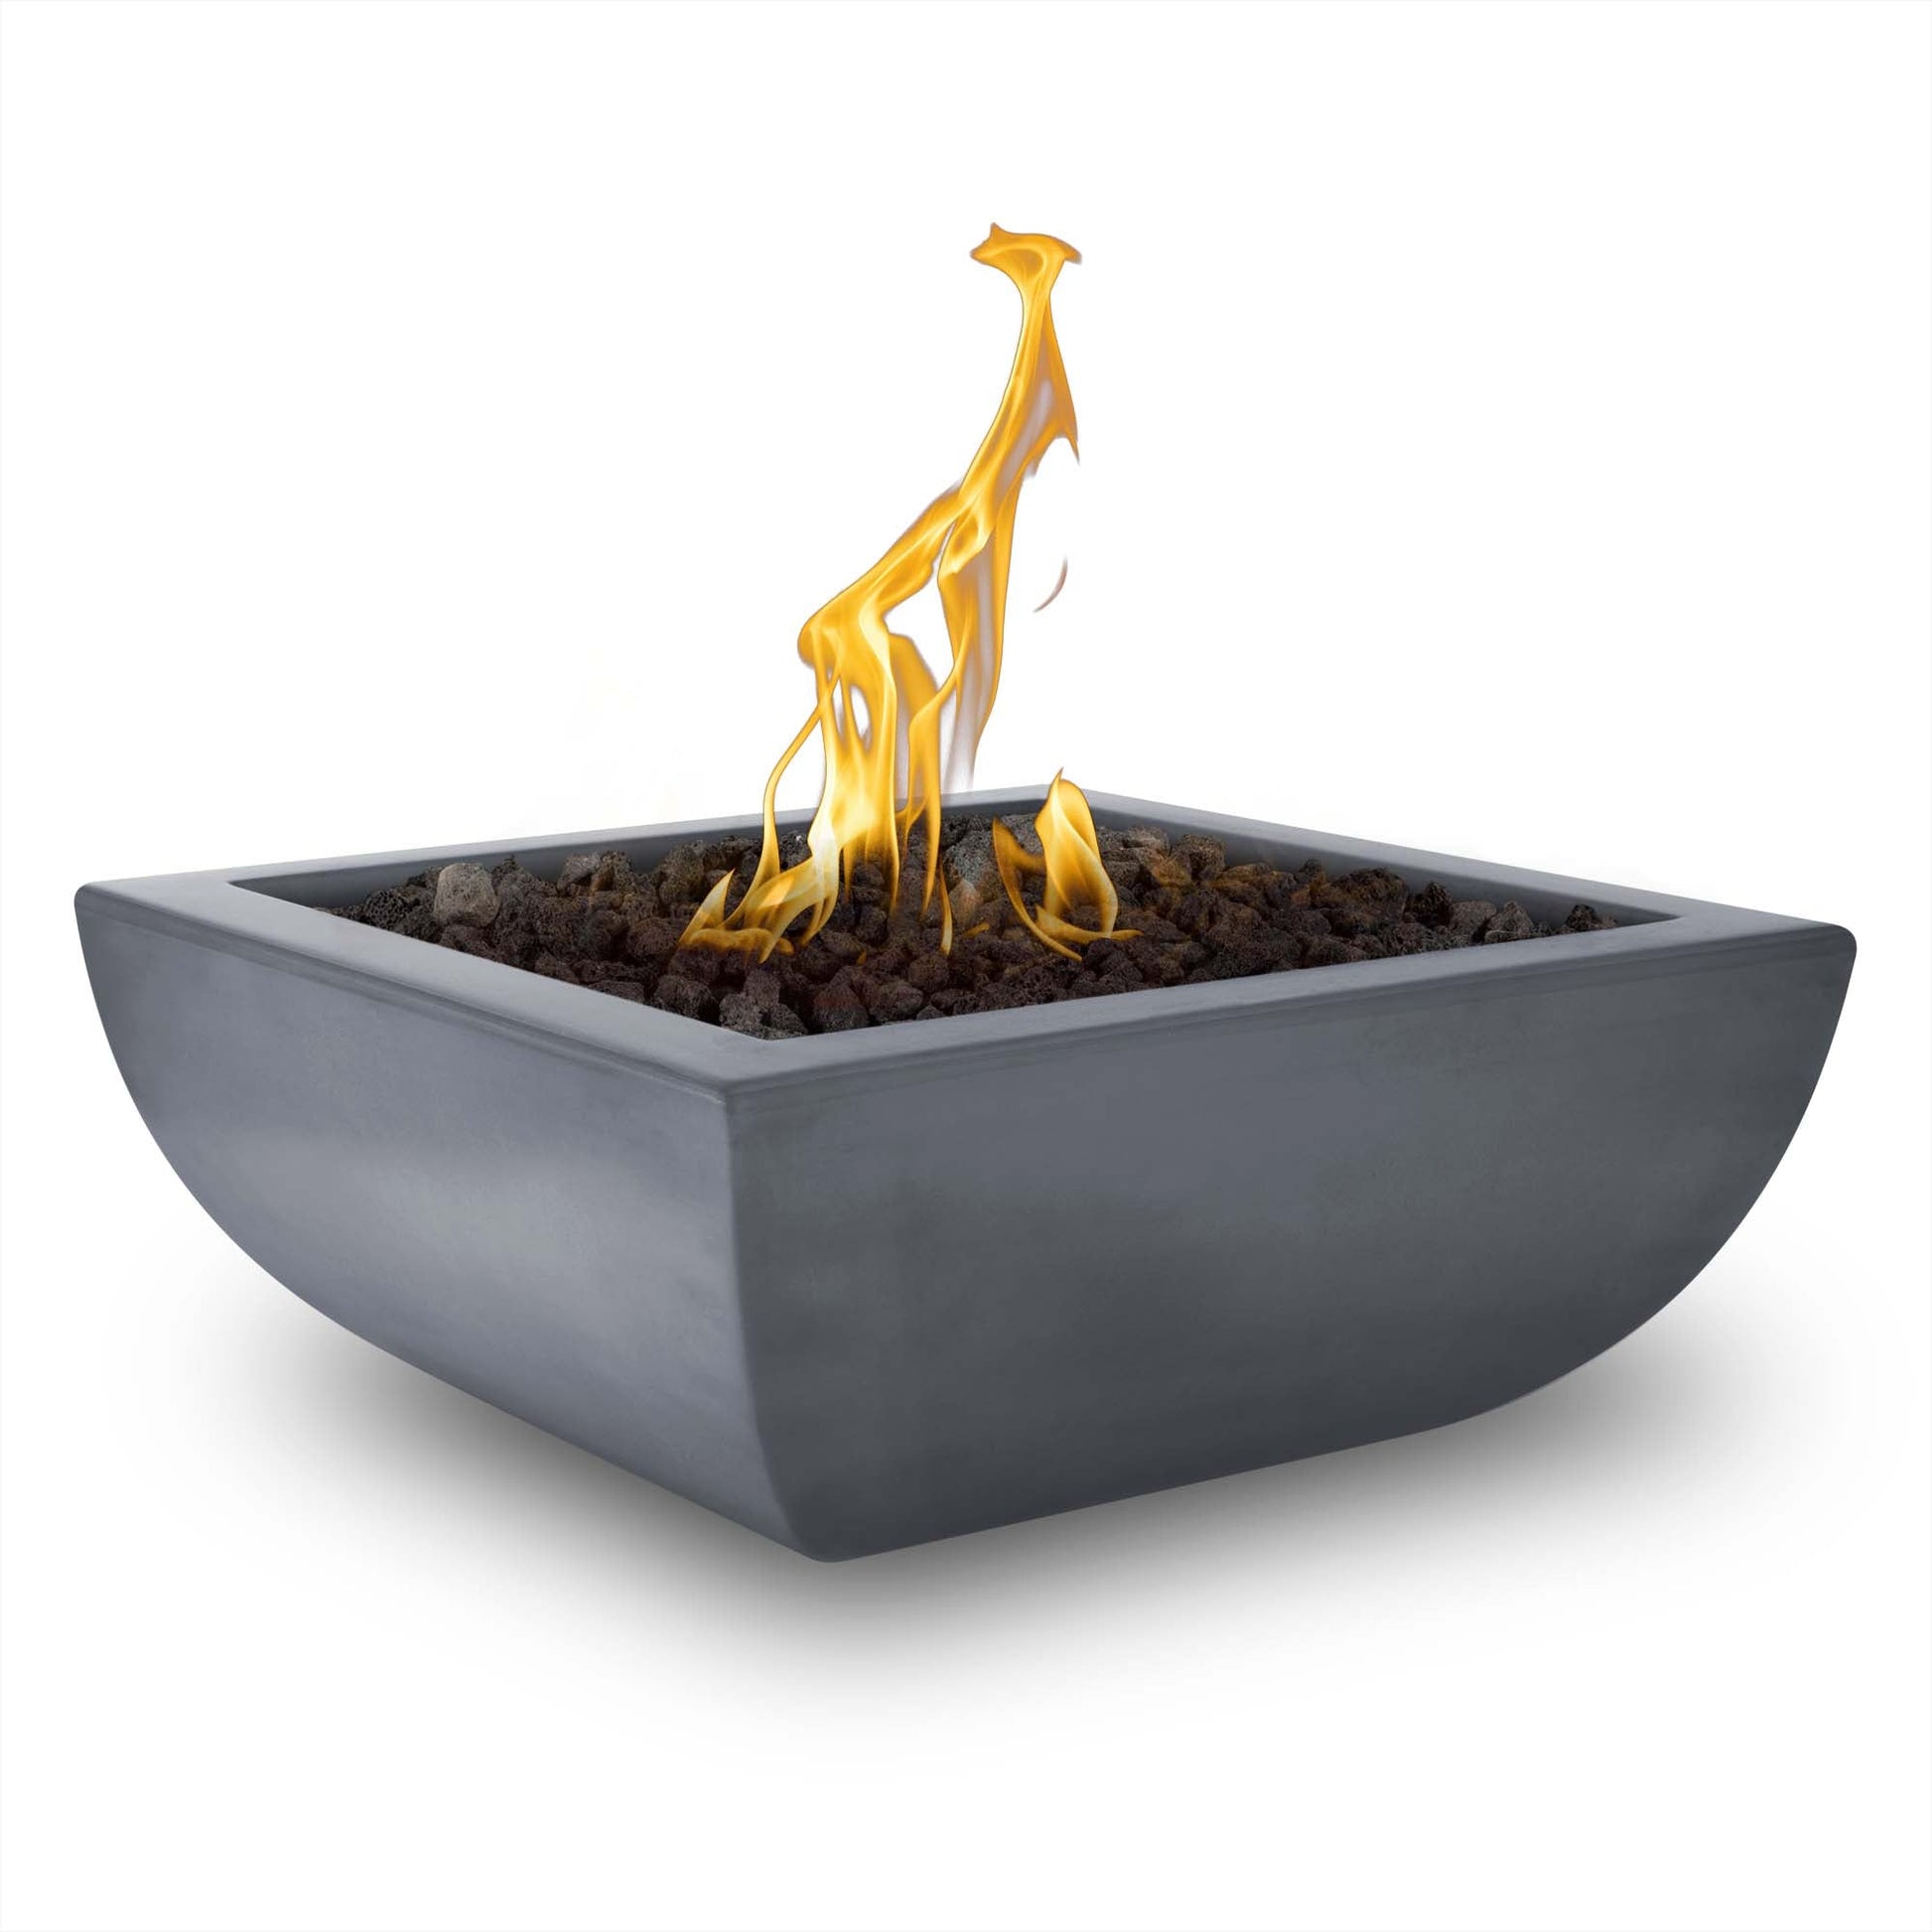 The Outdoor Plus Square Avalon 36" Rustic Gray GFRC Concrete Liquid Propane Fire Bowl with Match Lit with Flame Sense Ignition